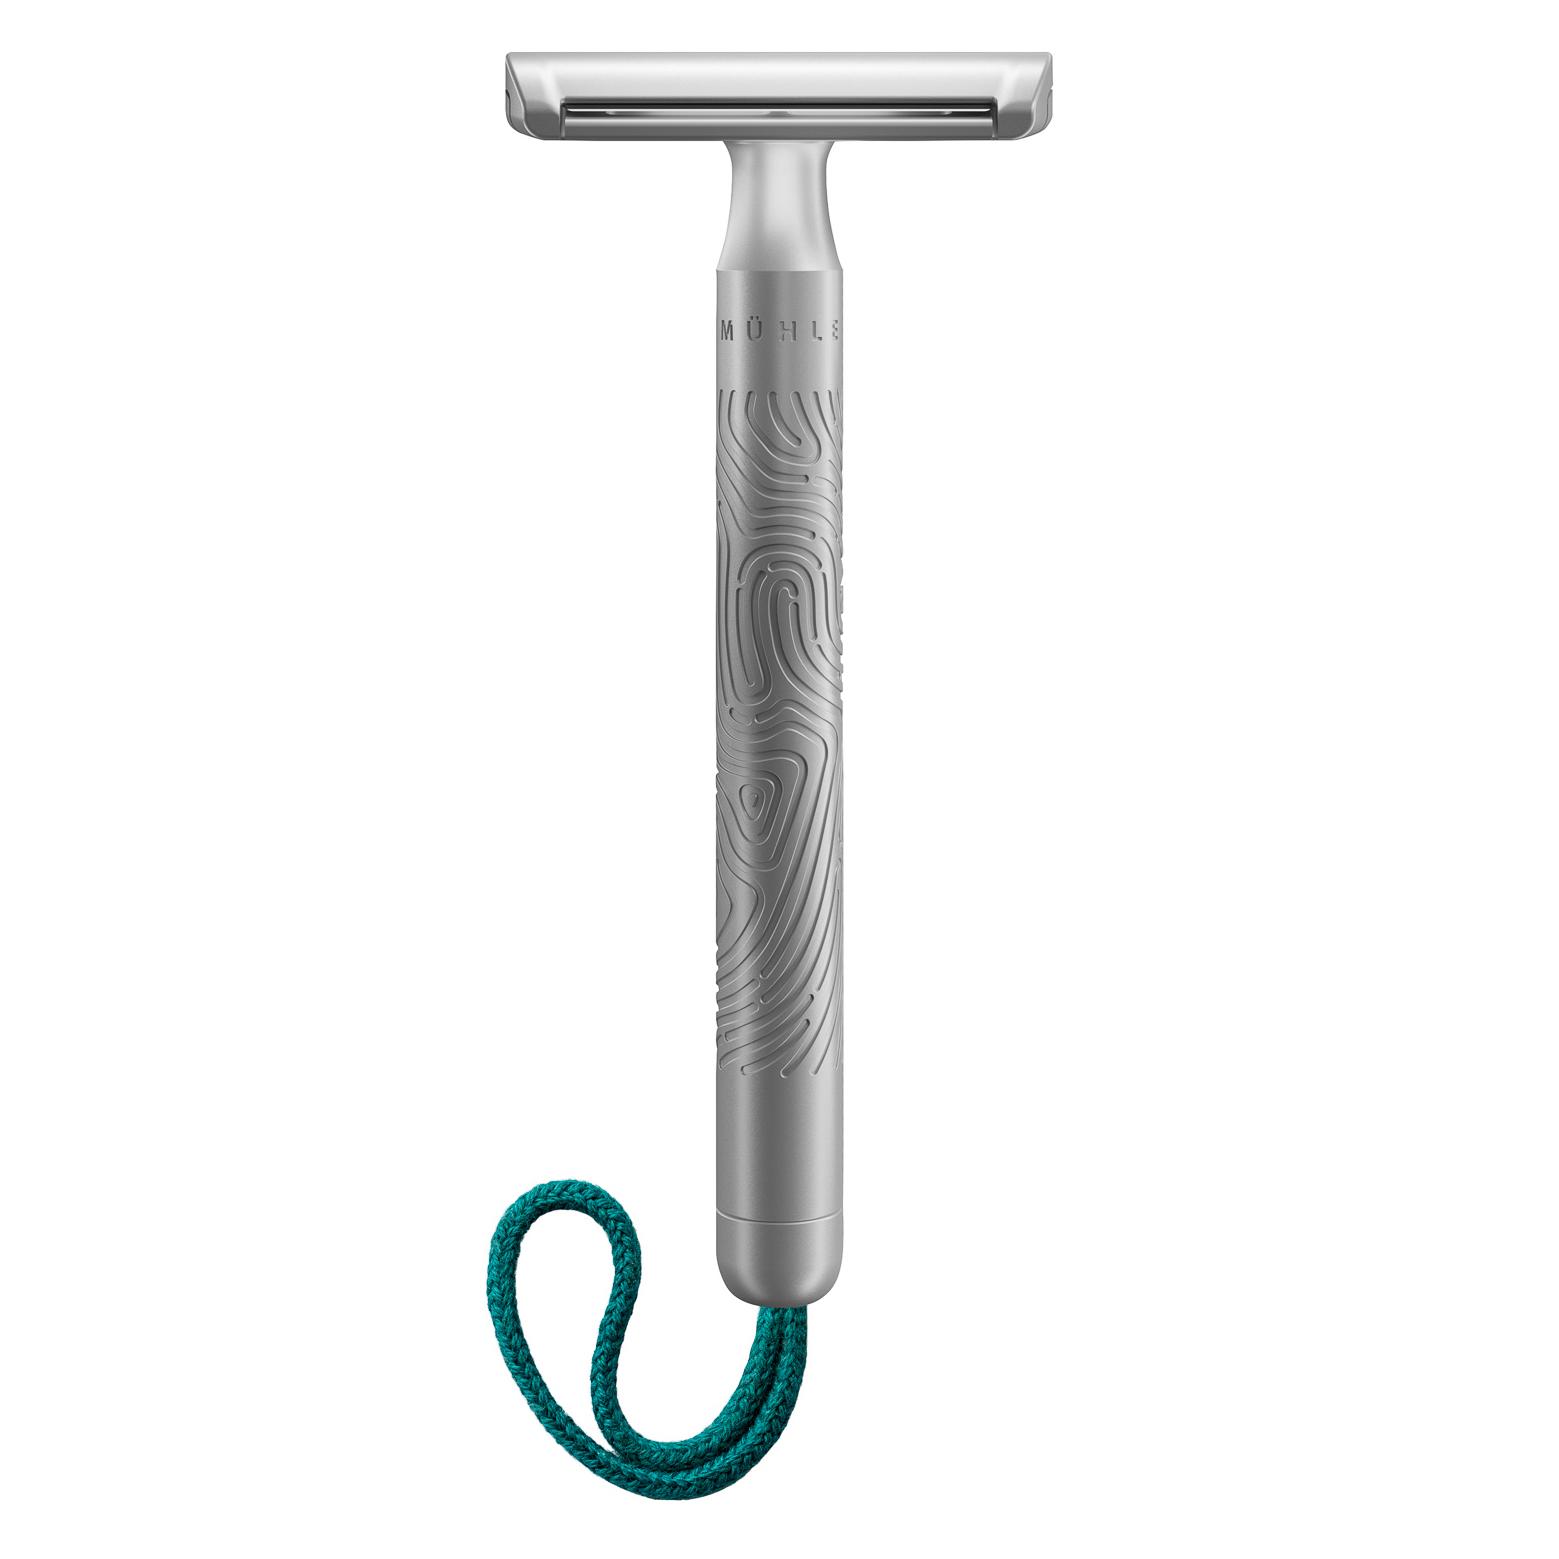 MUHLE Companion safety razor with turquoise colour cord